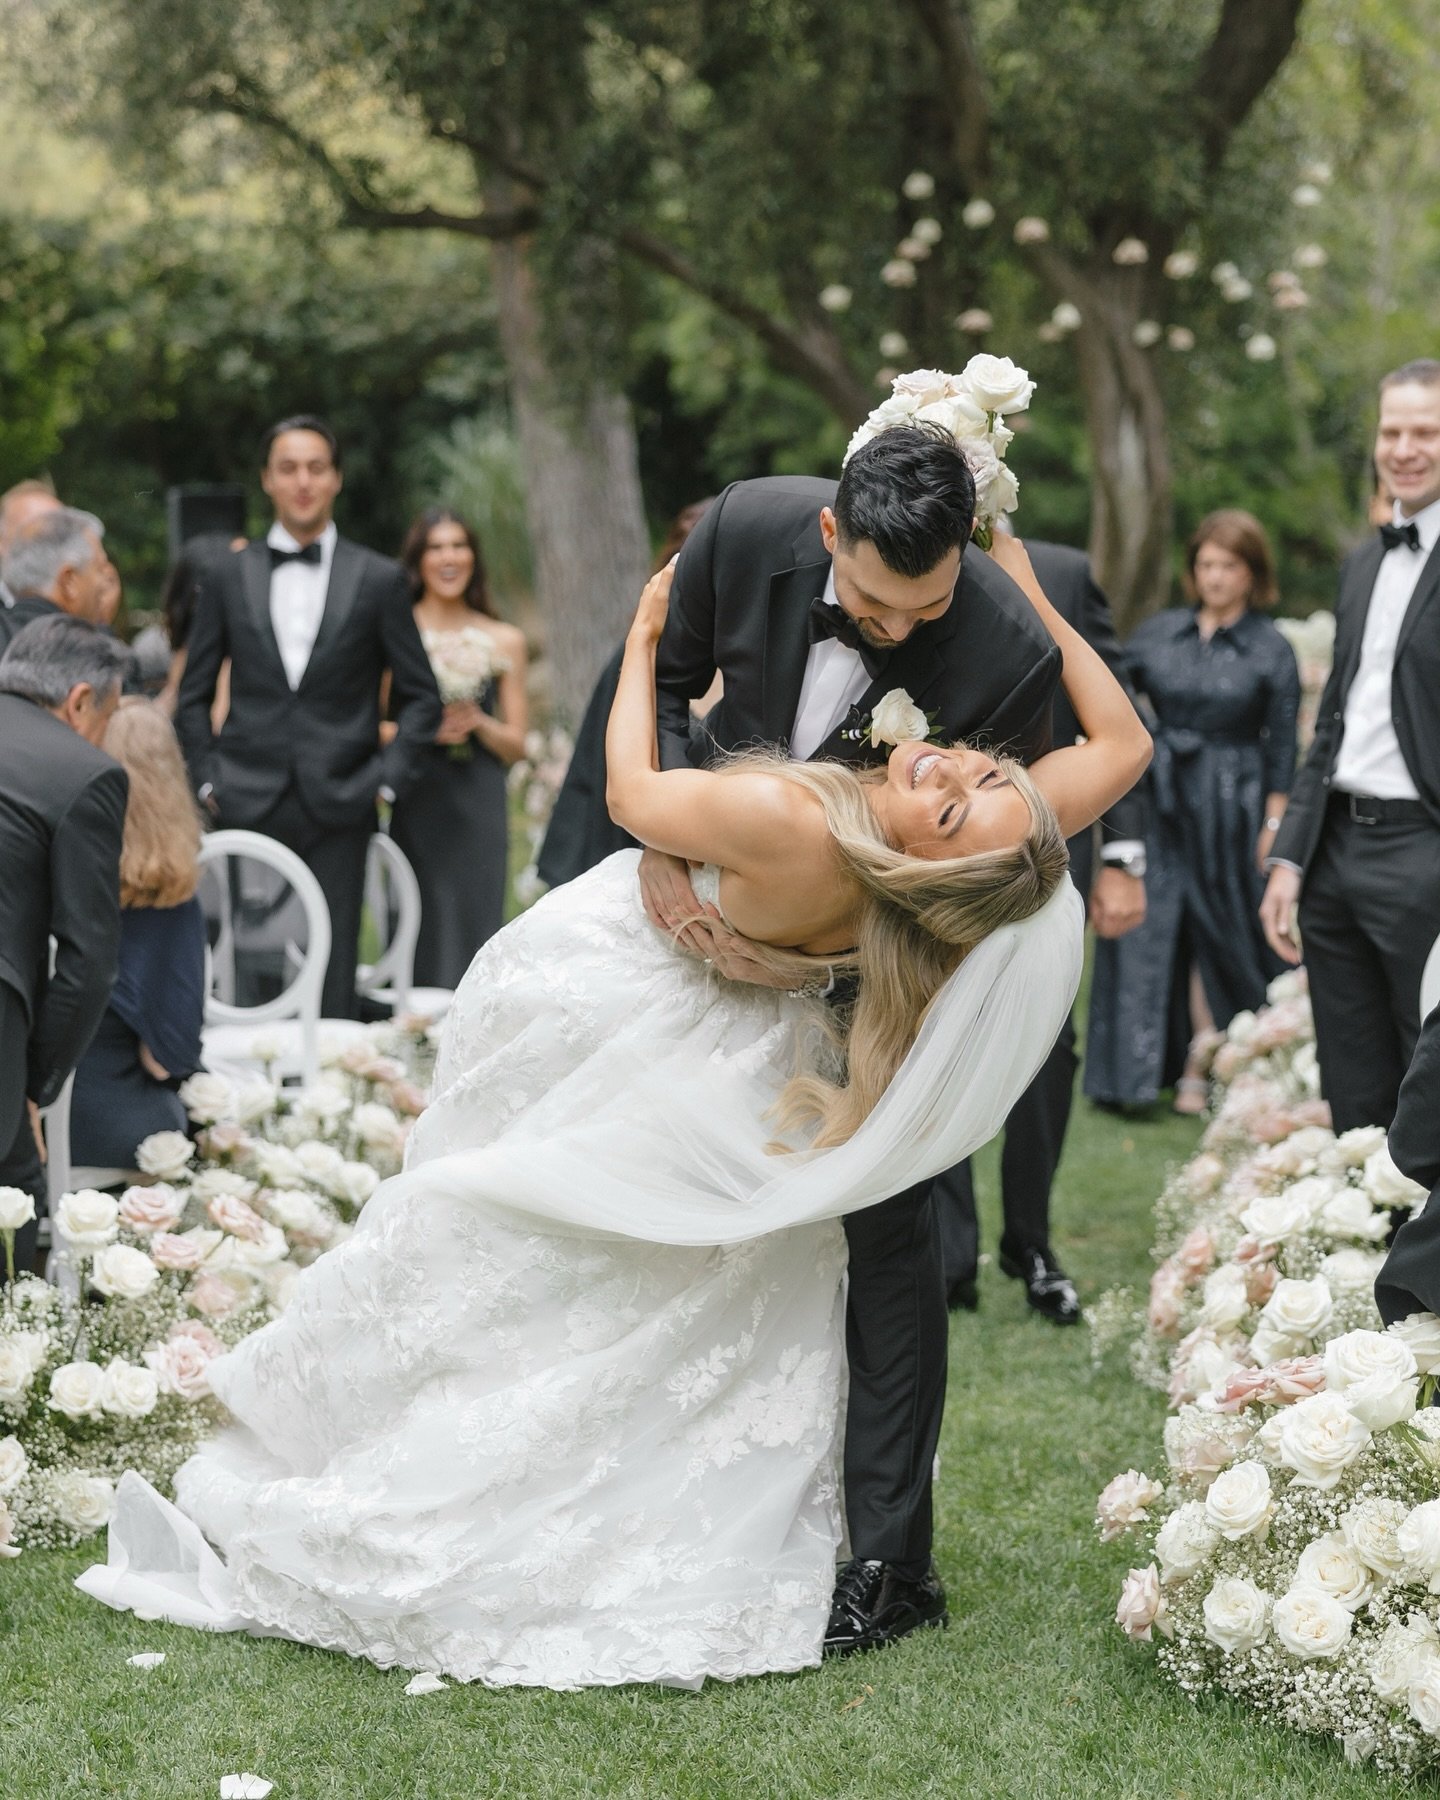 To say Alex and Olivia&rsquo;s wedding day was unforgettable would be an understatement. From Olivia&rsquo;s stunning @moniquelhuillierbride gown to the crystal chandeliers that adorned the candle lit reception space, this black tie affair, planned t